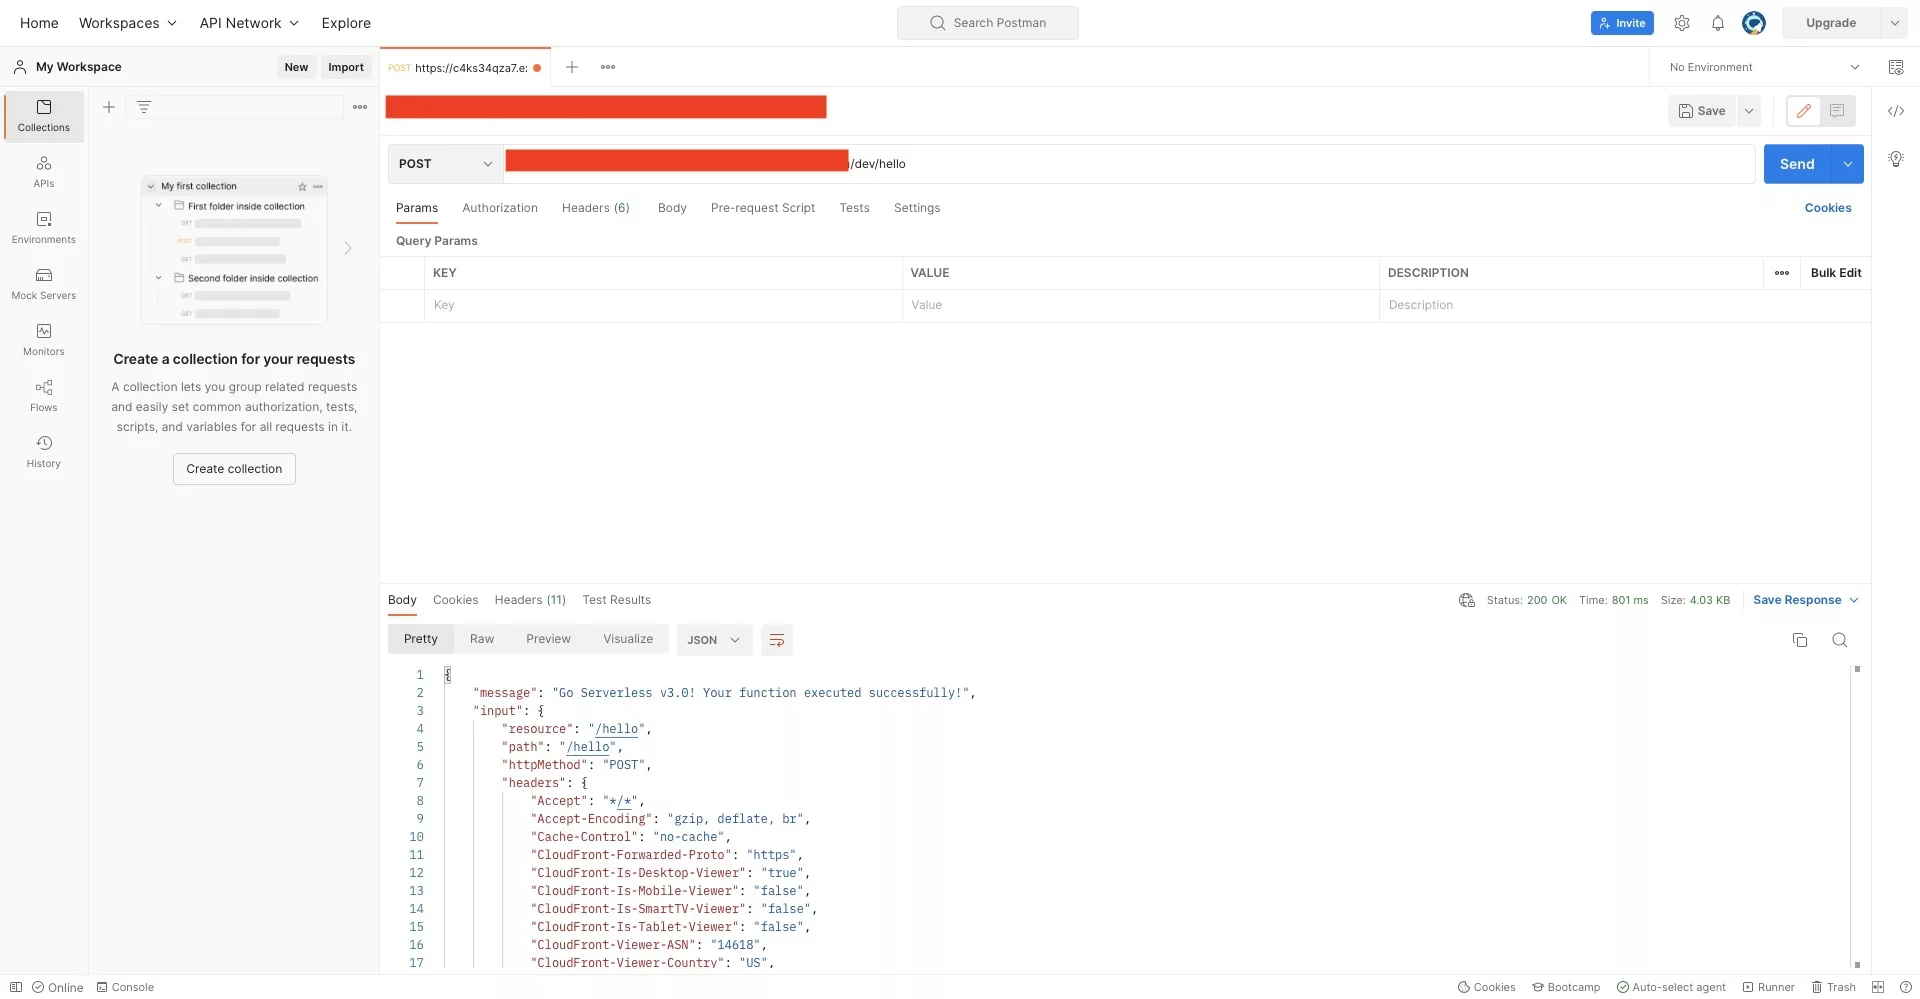 A screenshot of Postman showing the API that we created in this tutorial being called successfully.